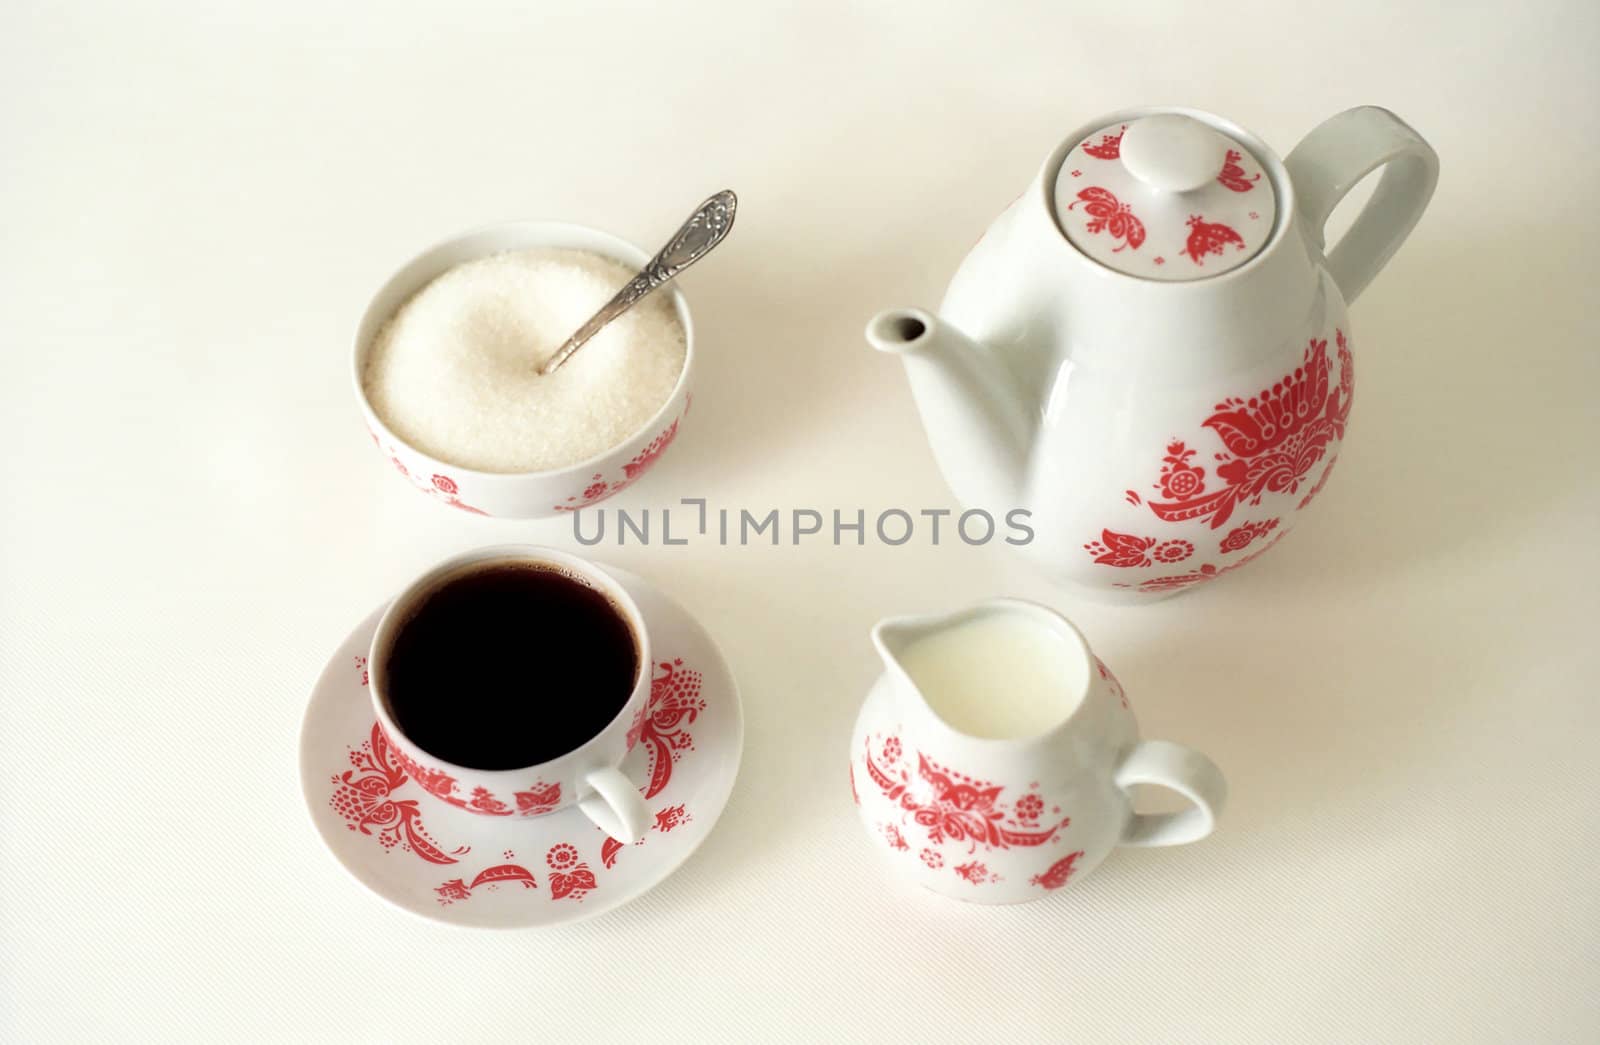 Coffeepot and a cup of coffee with milk and sugar